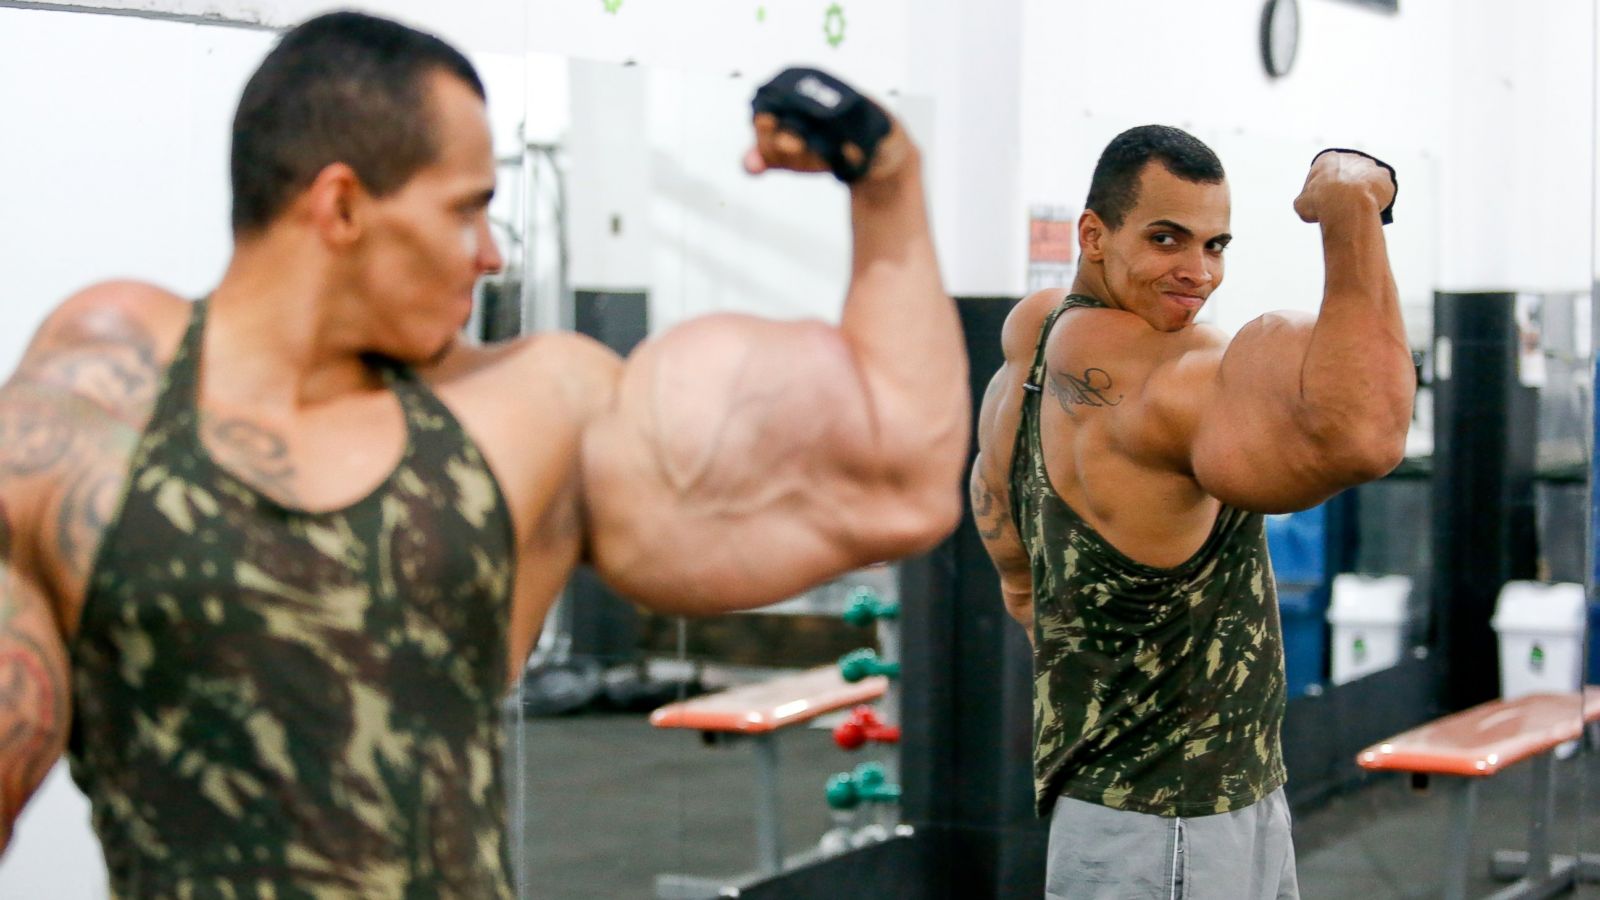 Brazilian Bodybuilder Claims Synthetic Material Brought Huge Muscles, but  Also Medical Danger - ABC News